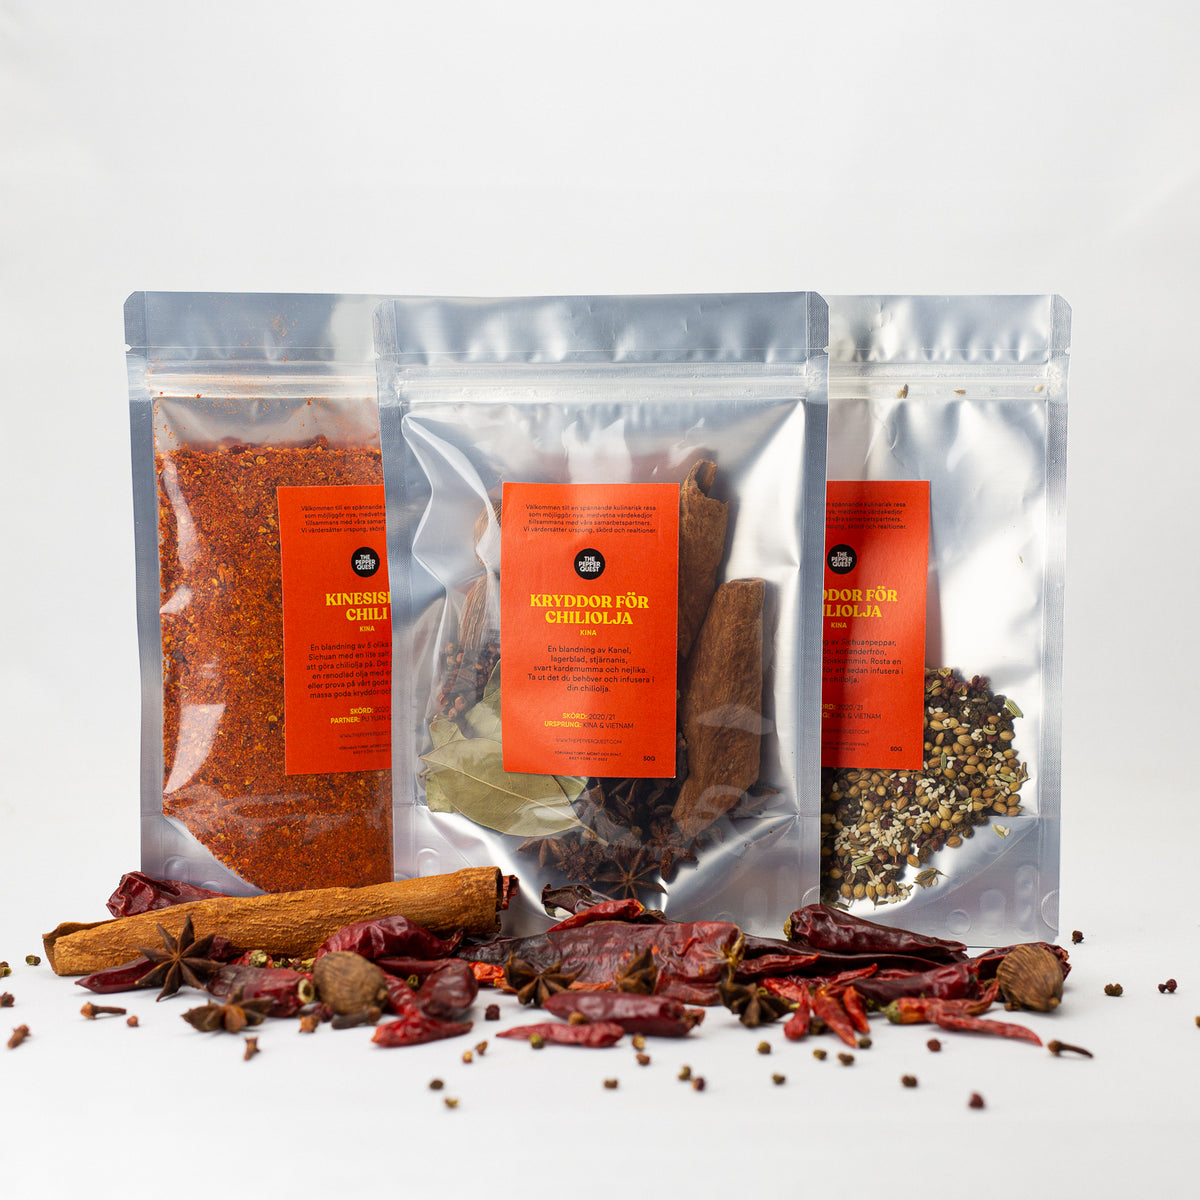 The Quest Chili Oil Pack